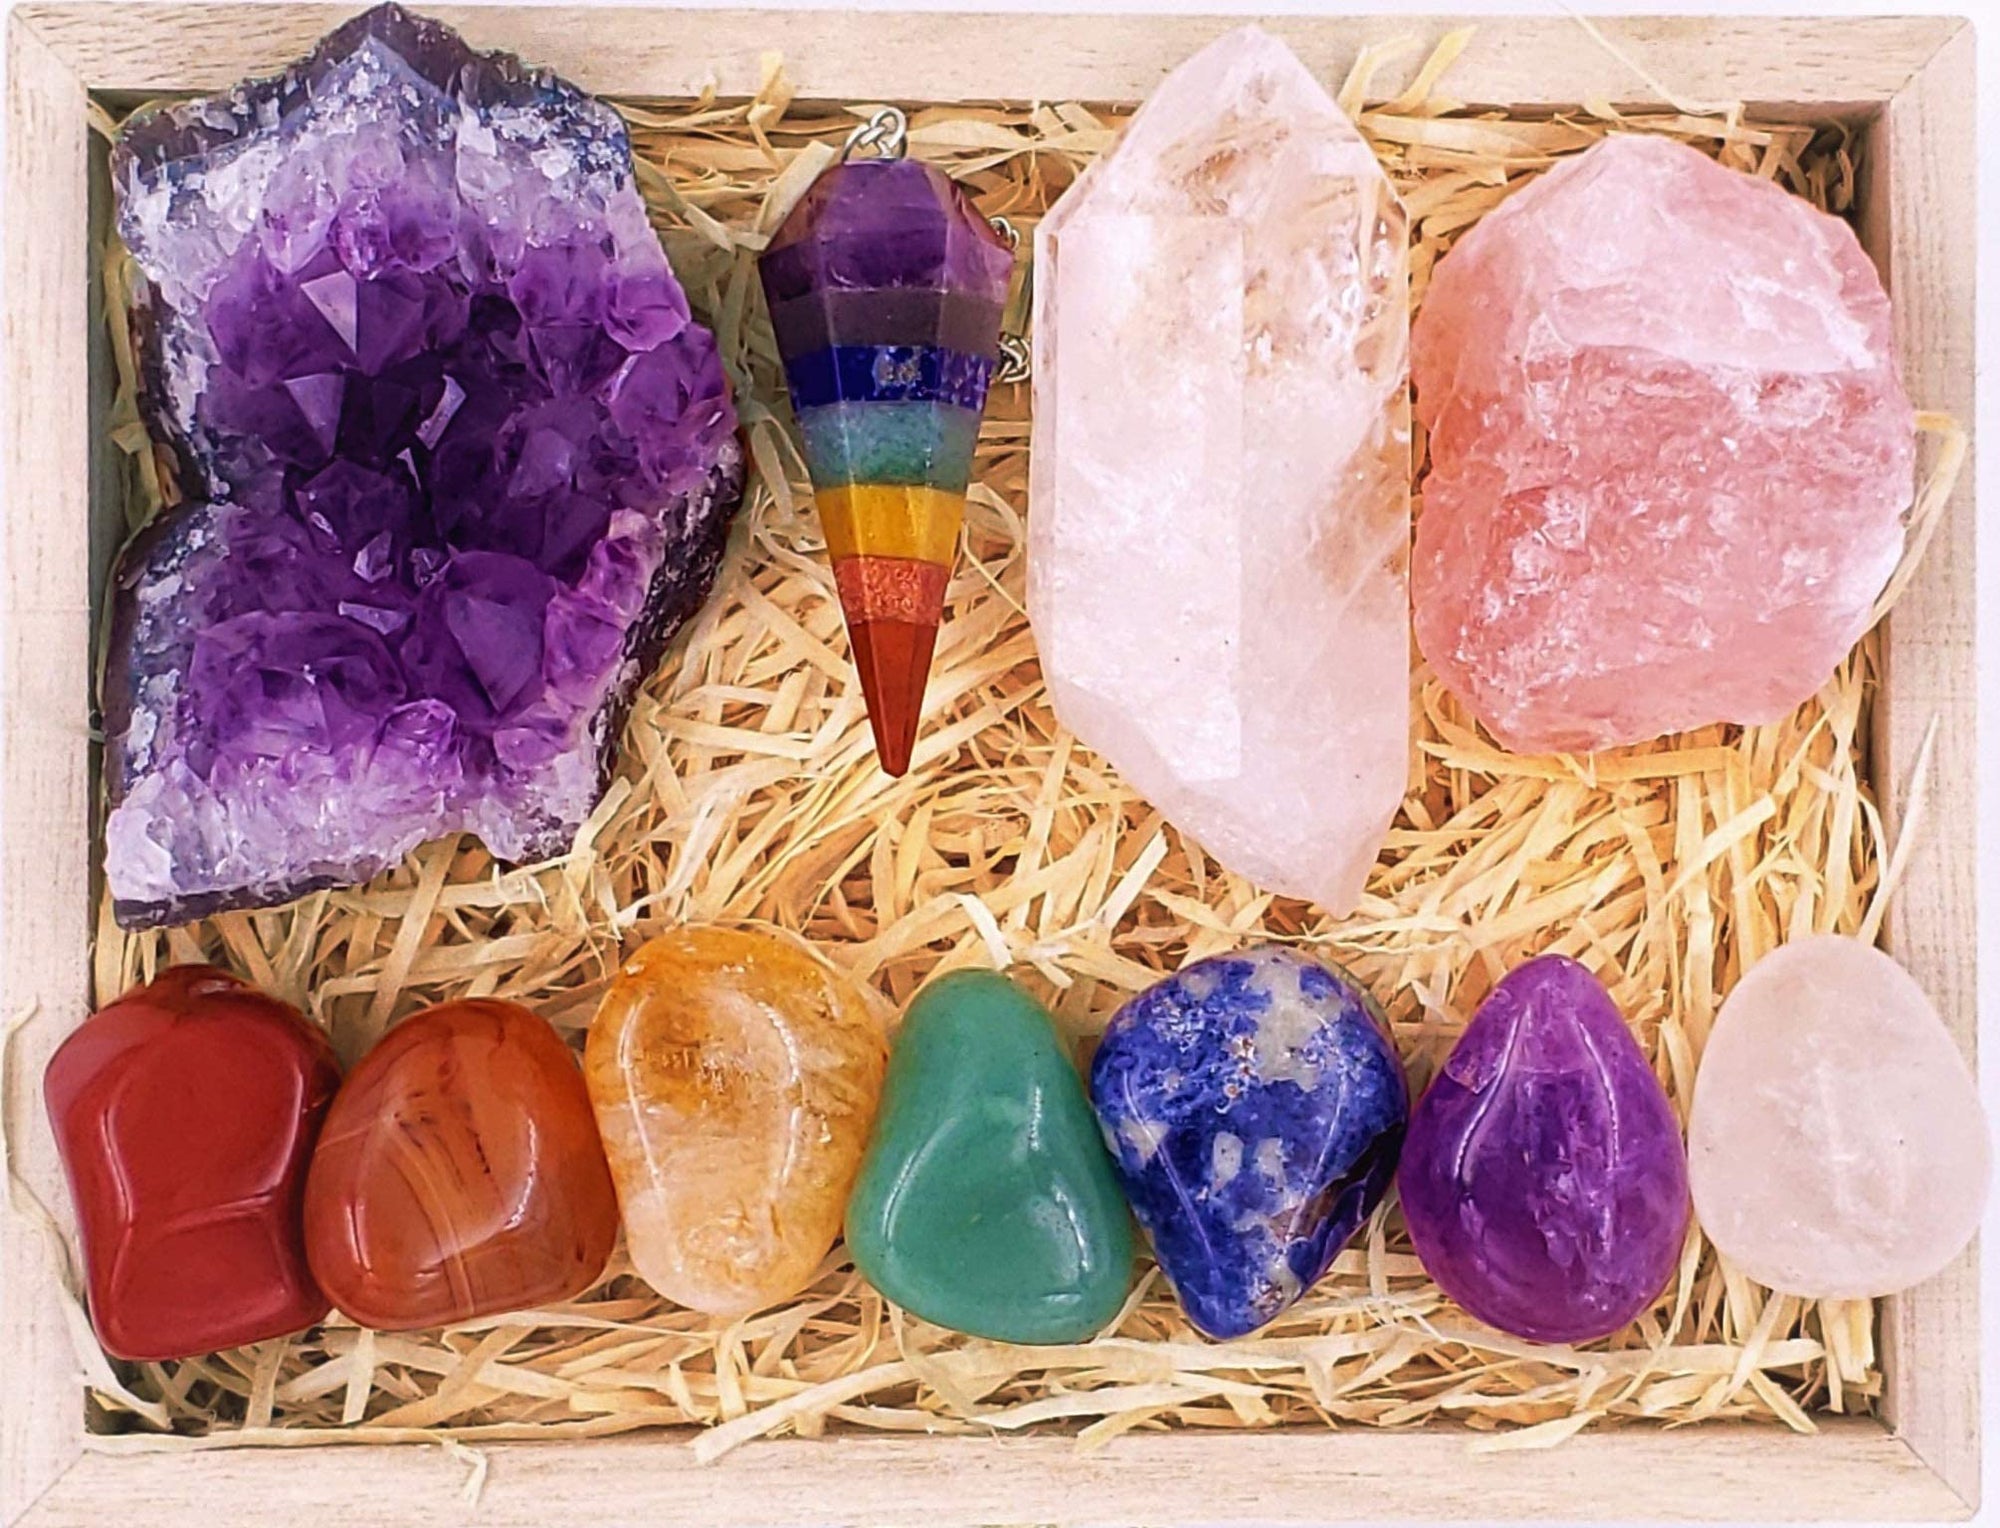 10 Healing Crystals for Daily Life